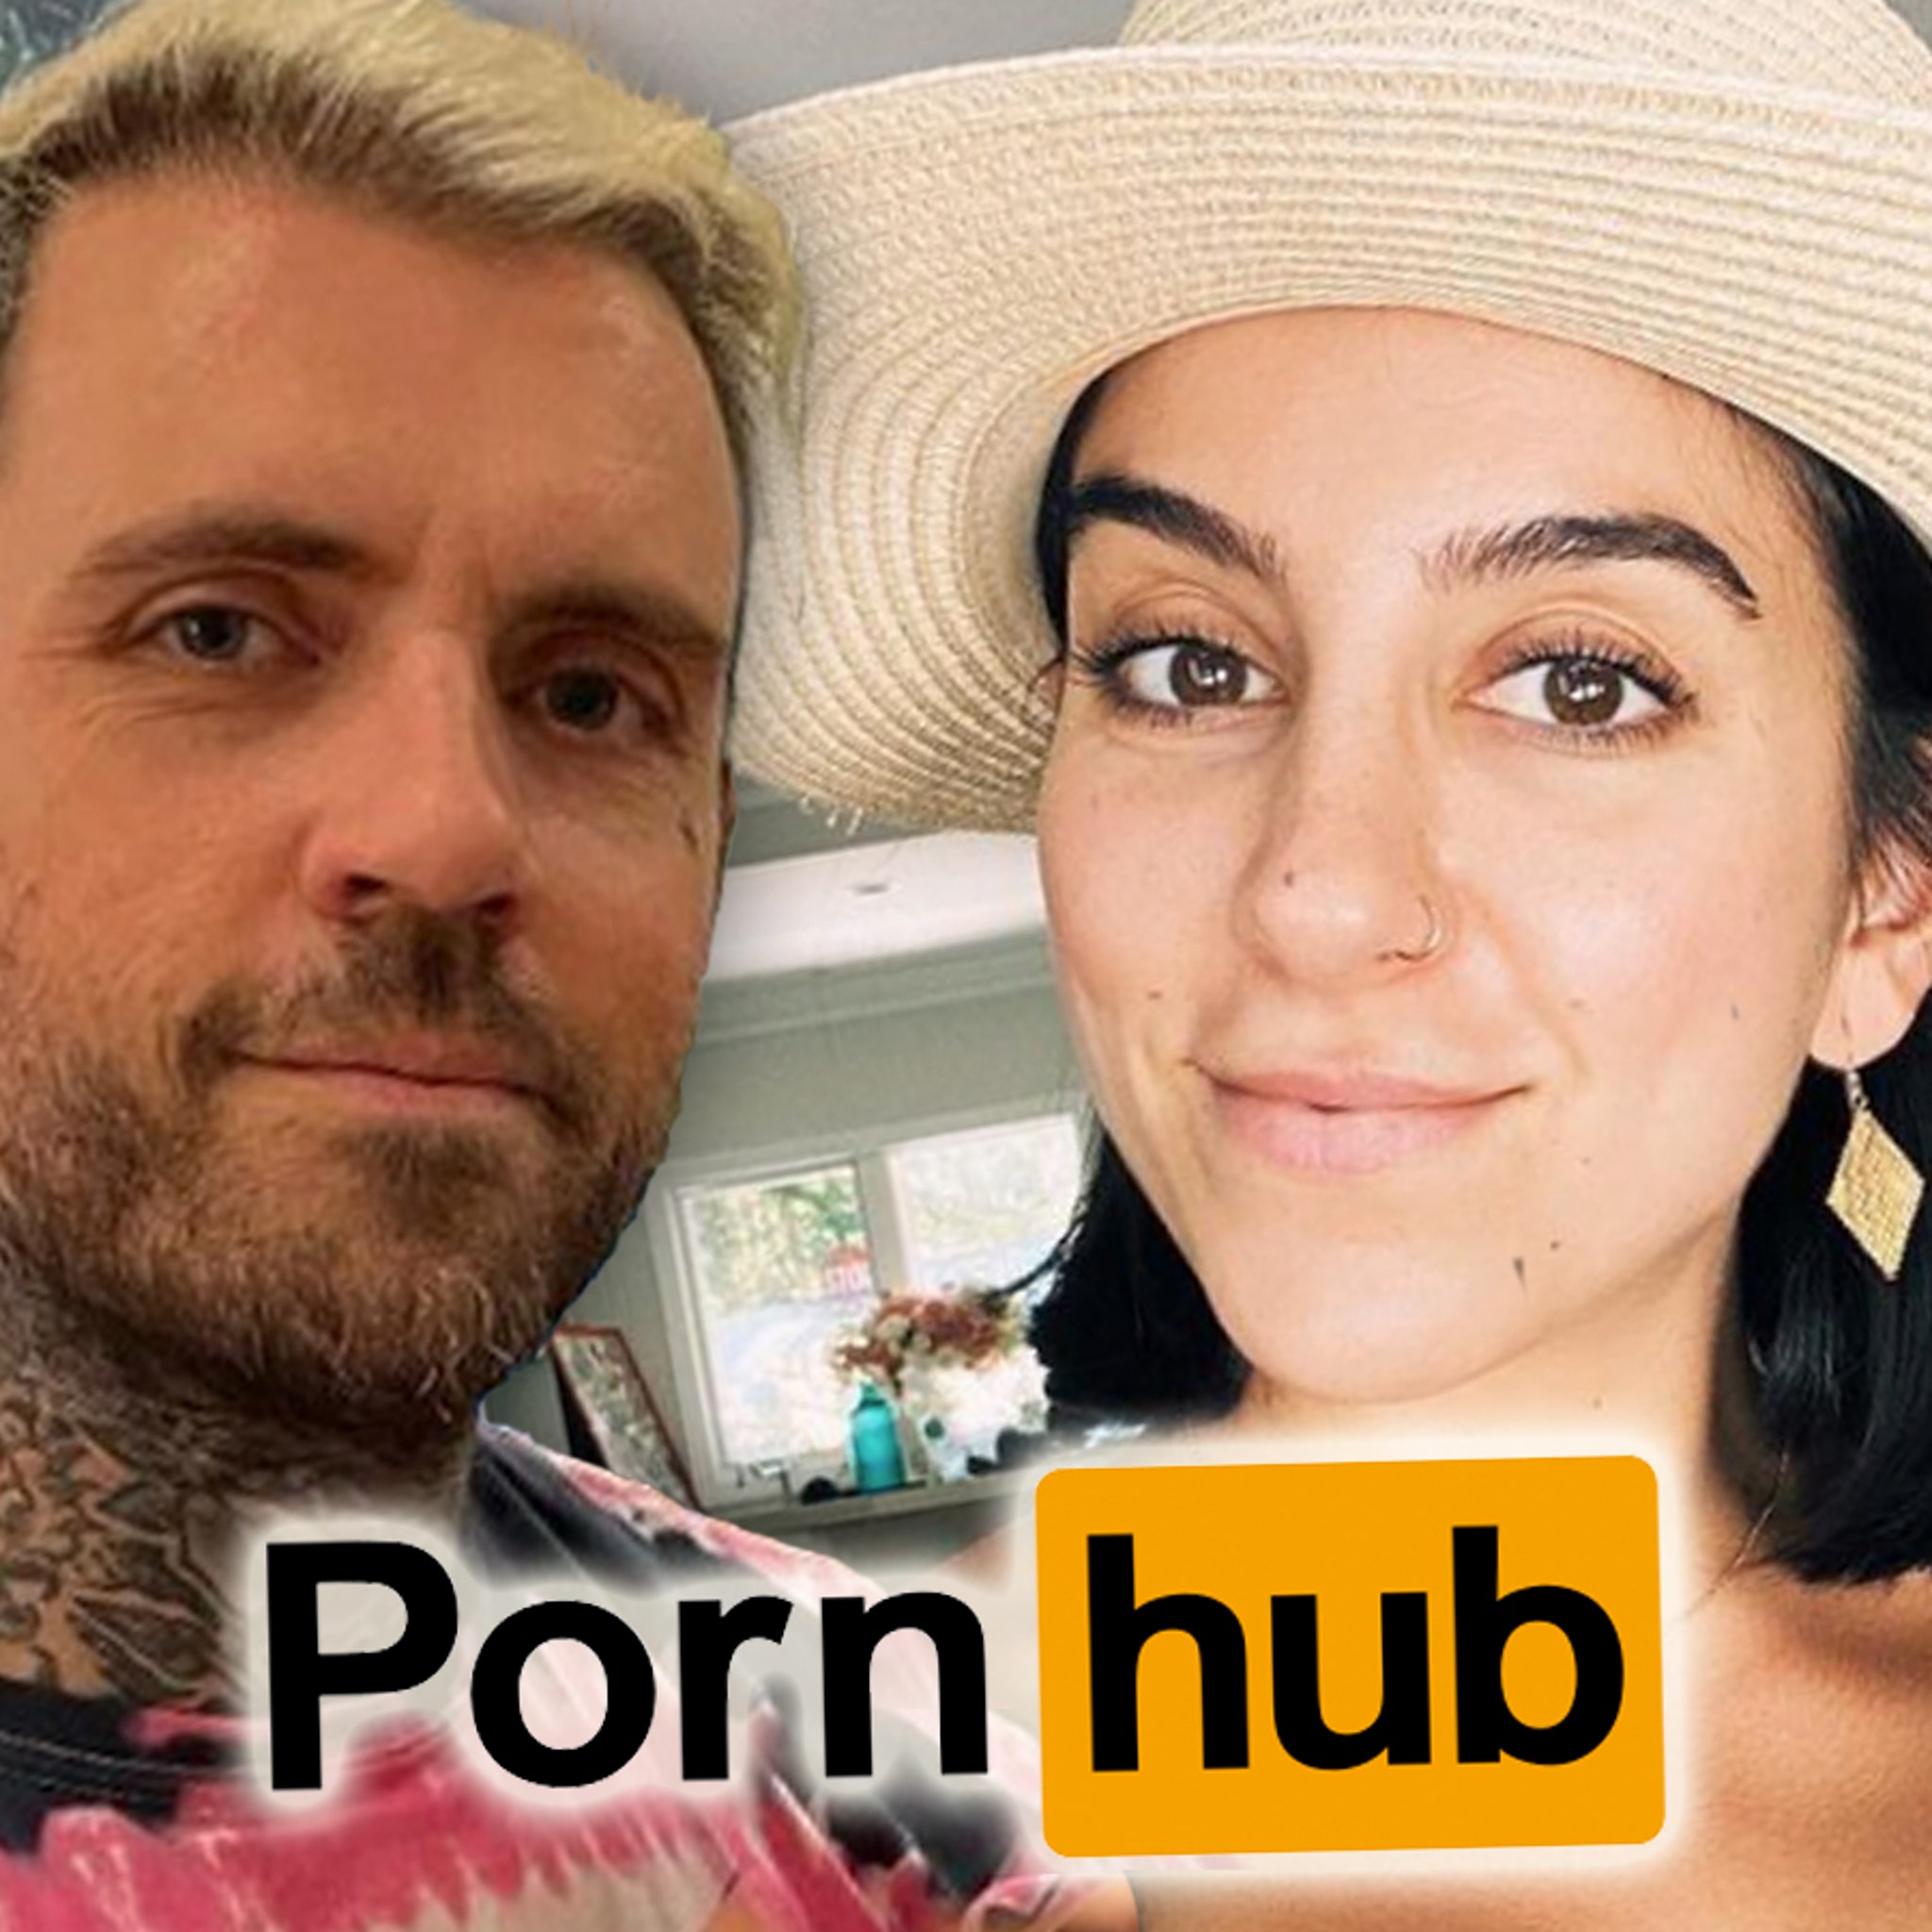 Ariana Grande Sex Tape Pornhub - Adam22, Lena The Plug Surging On Pornhub After Her Romp with Another Man